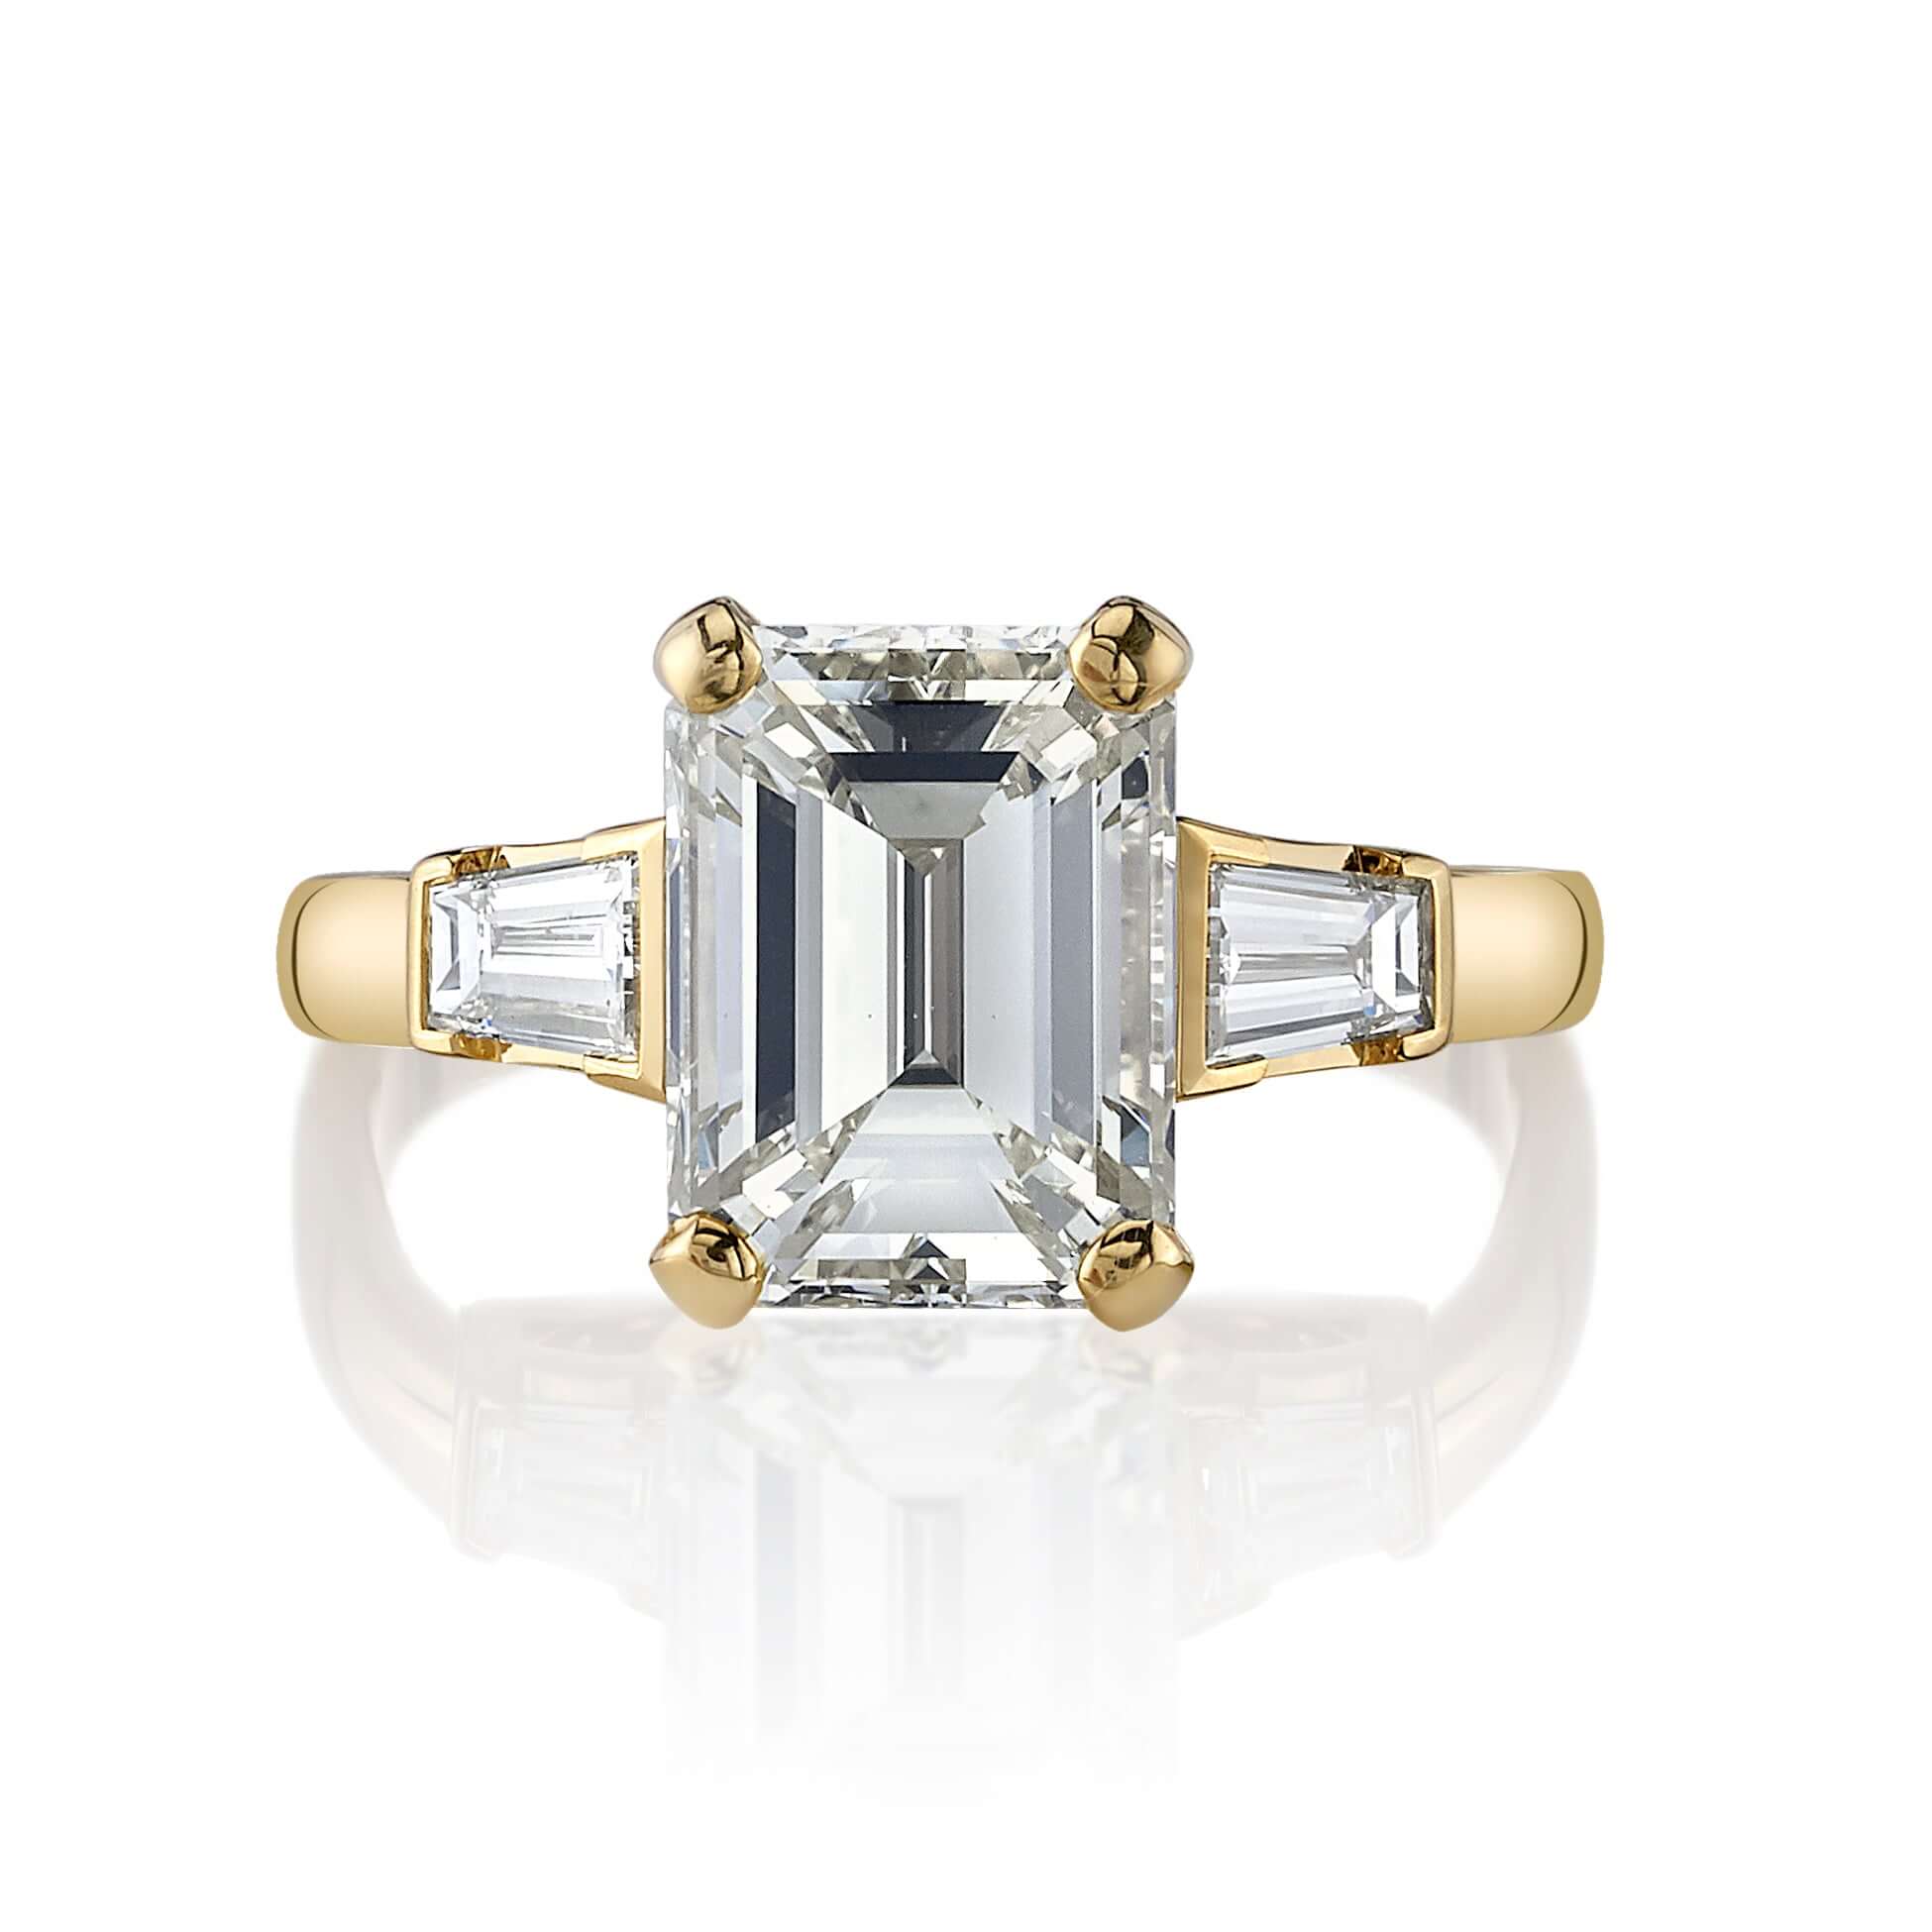 SINGLE STONE FAY RING featuring 3.30ct S-T/VVS2 GIA certified emerald cut diamond with 0.55ctw baguette cut accent diamonds prong set in a handcrafted 18K yellow gold setting.